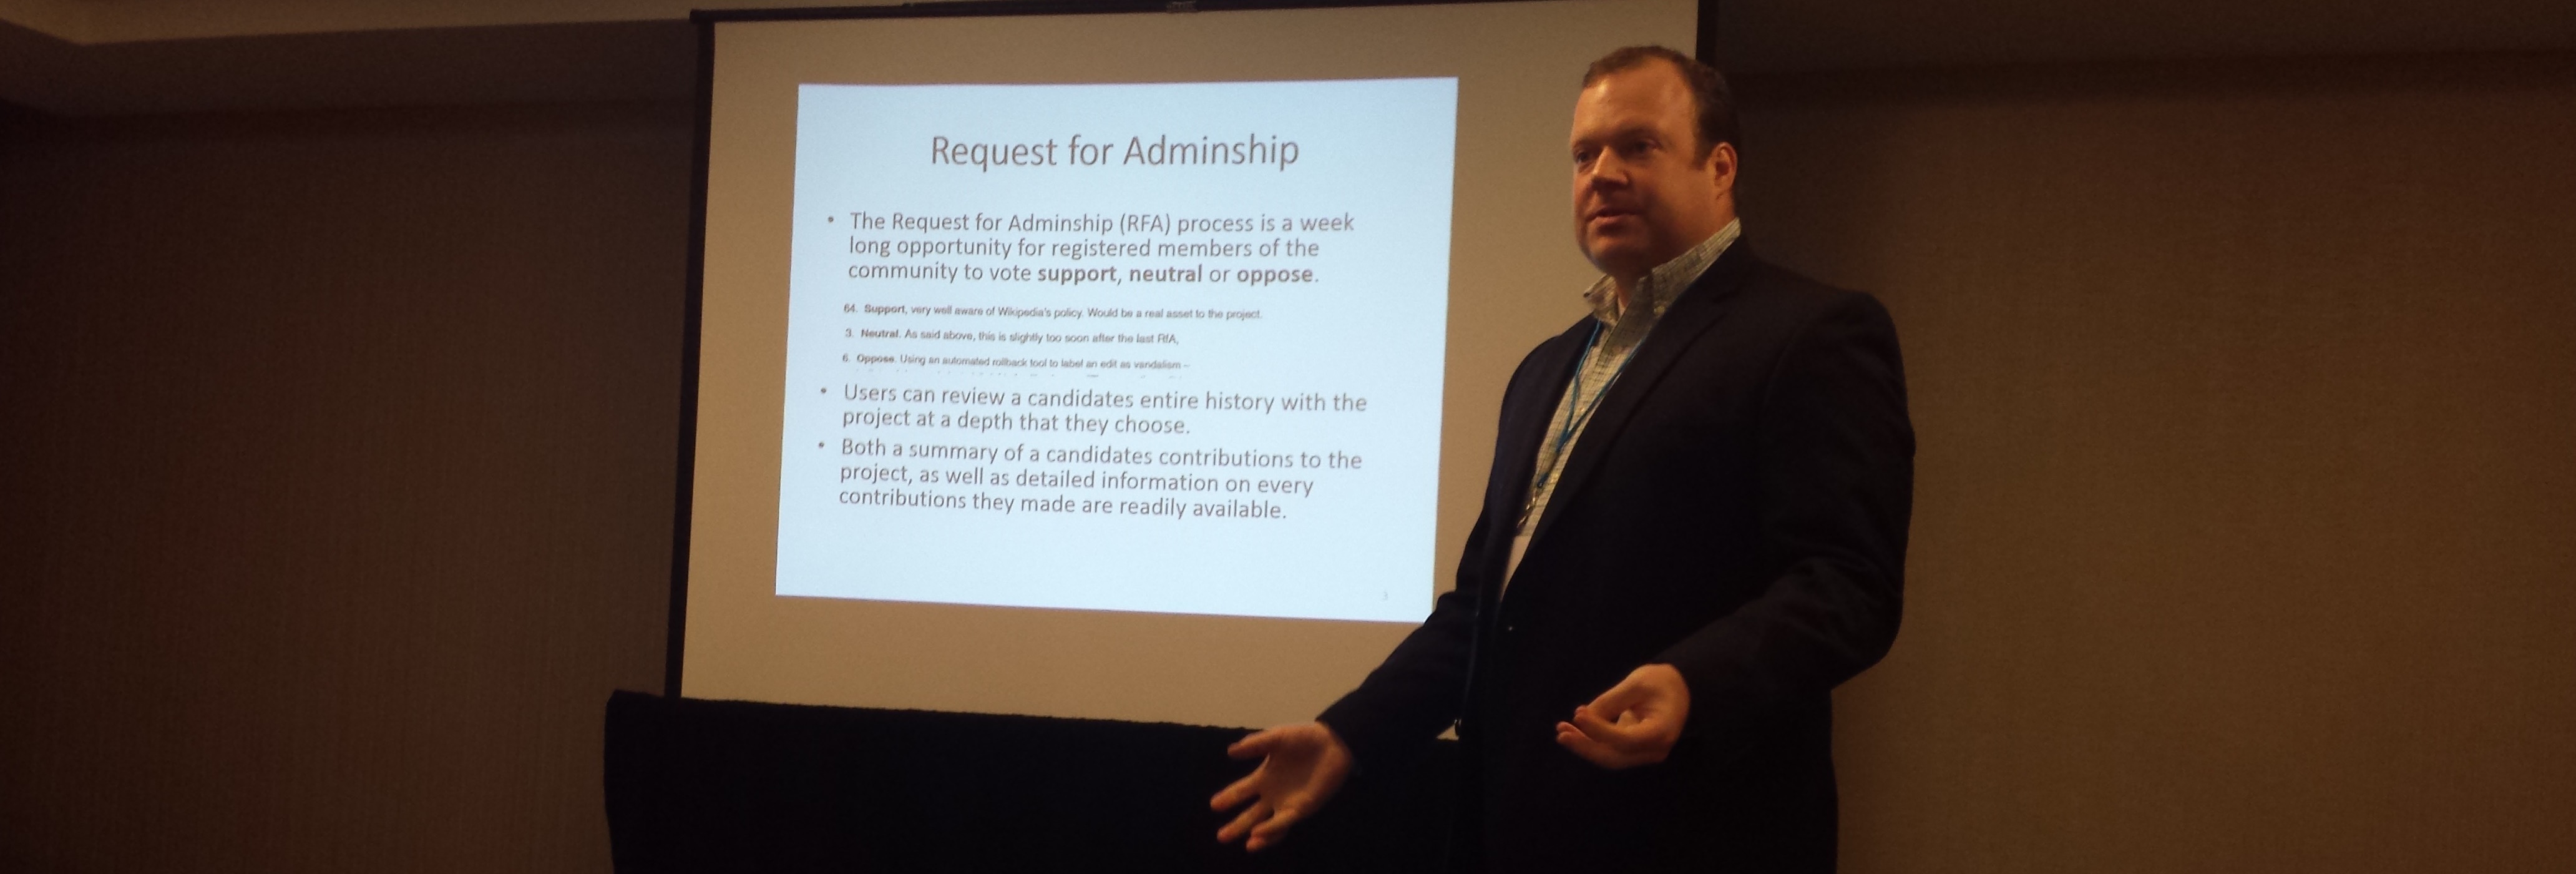 Chris Kreider presenting research at the SAIS 2015 conference on the Wikipedia Request for Adminship Process